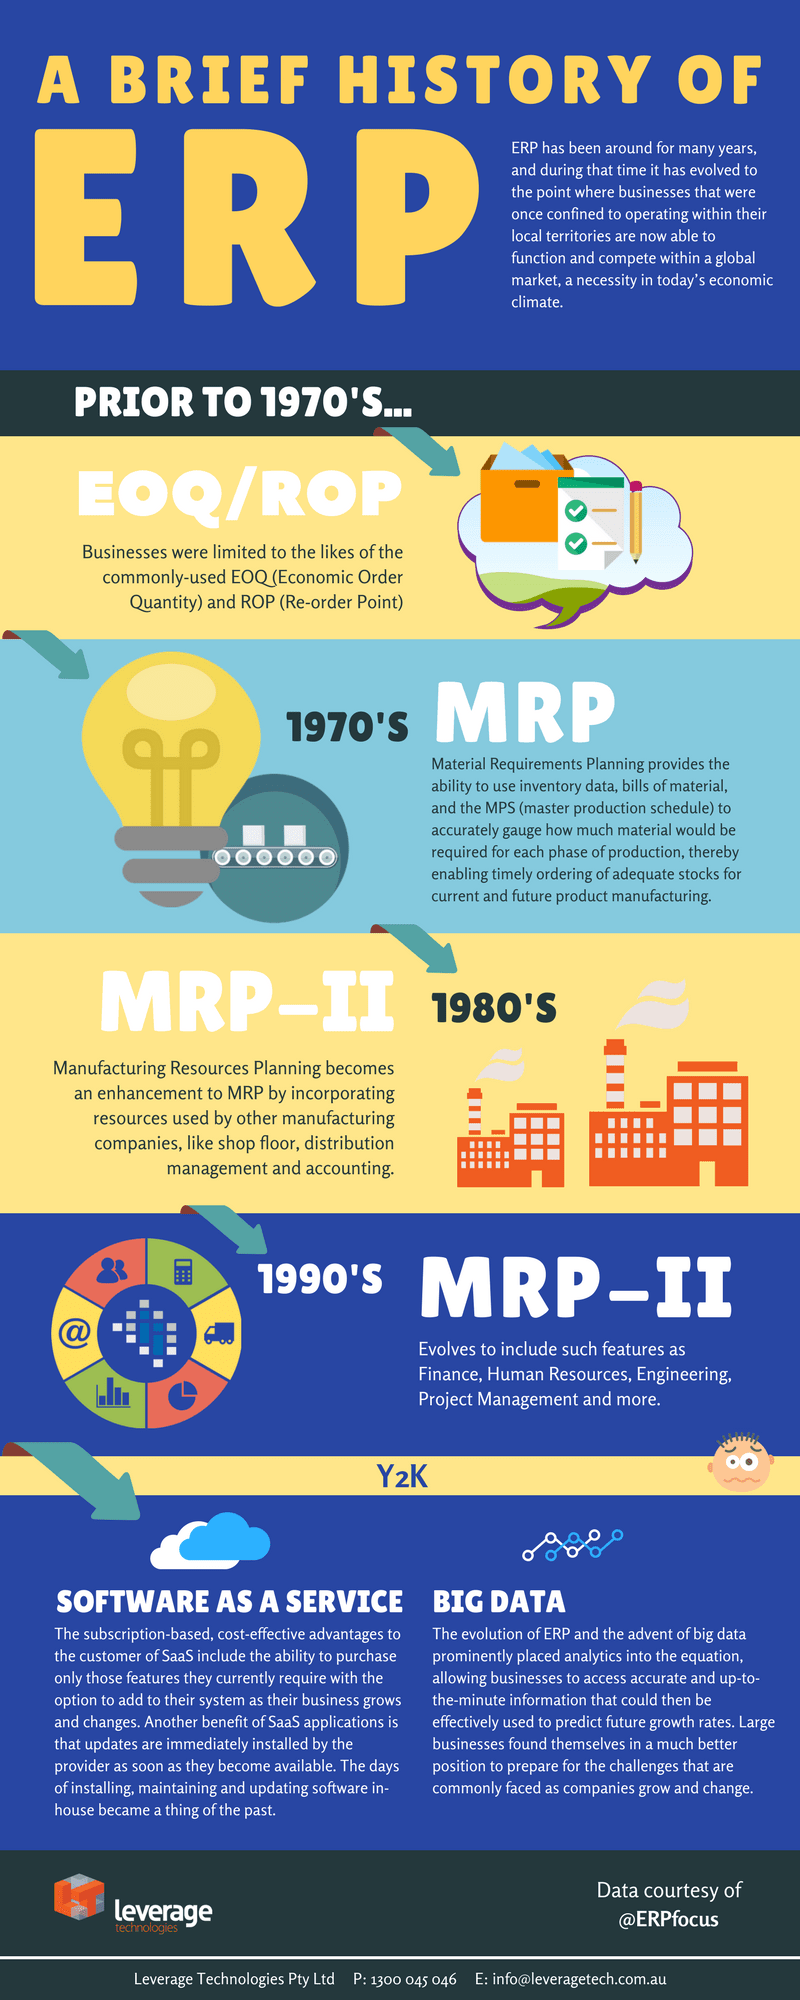 A BRIEF HISTORY OF ERP